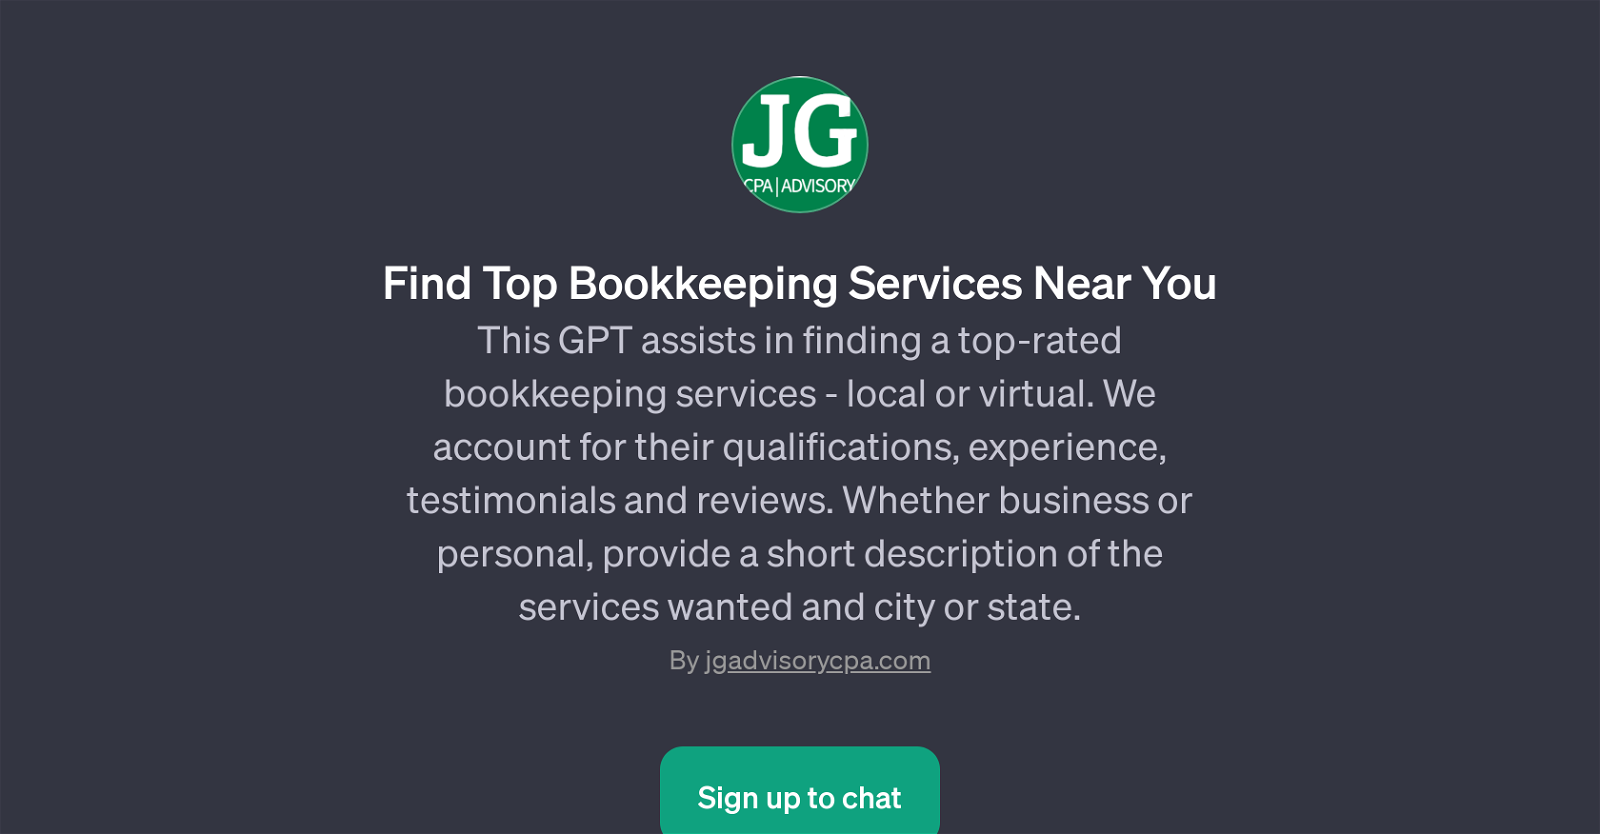 Find Top Bookkeeping Services Near You website